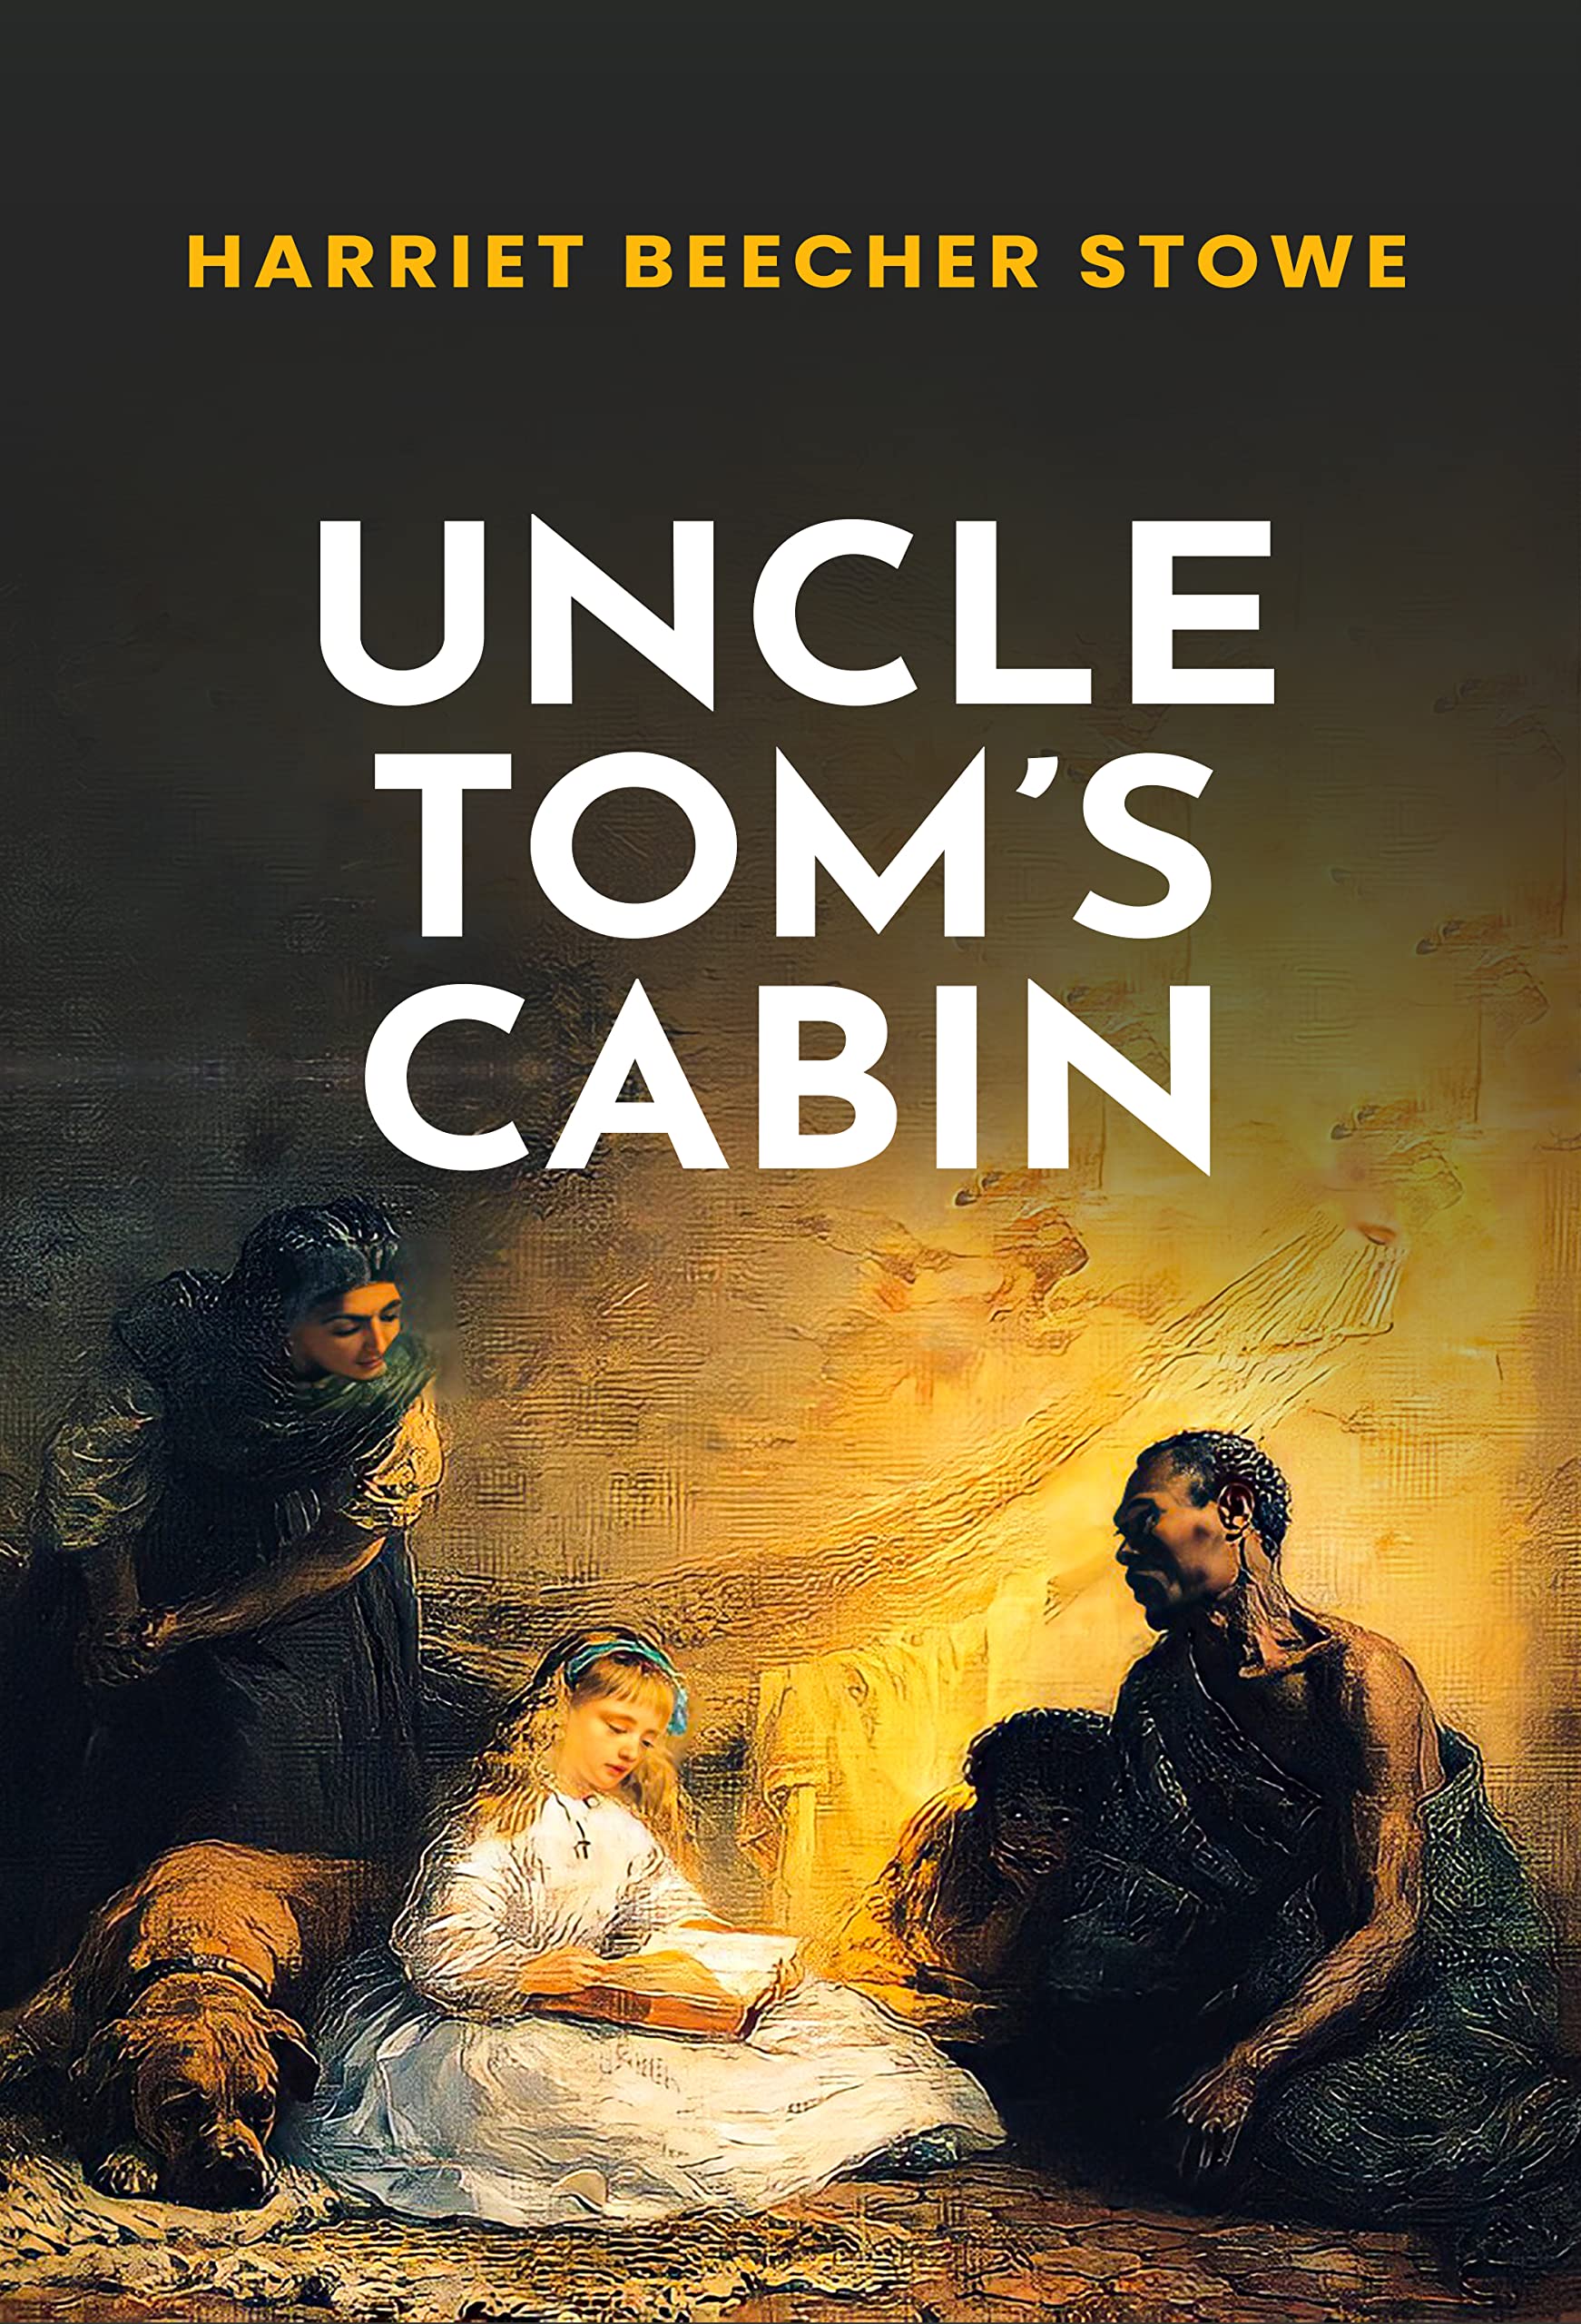 theme essay for uncle tom's cabin